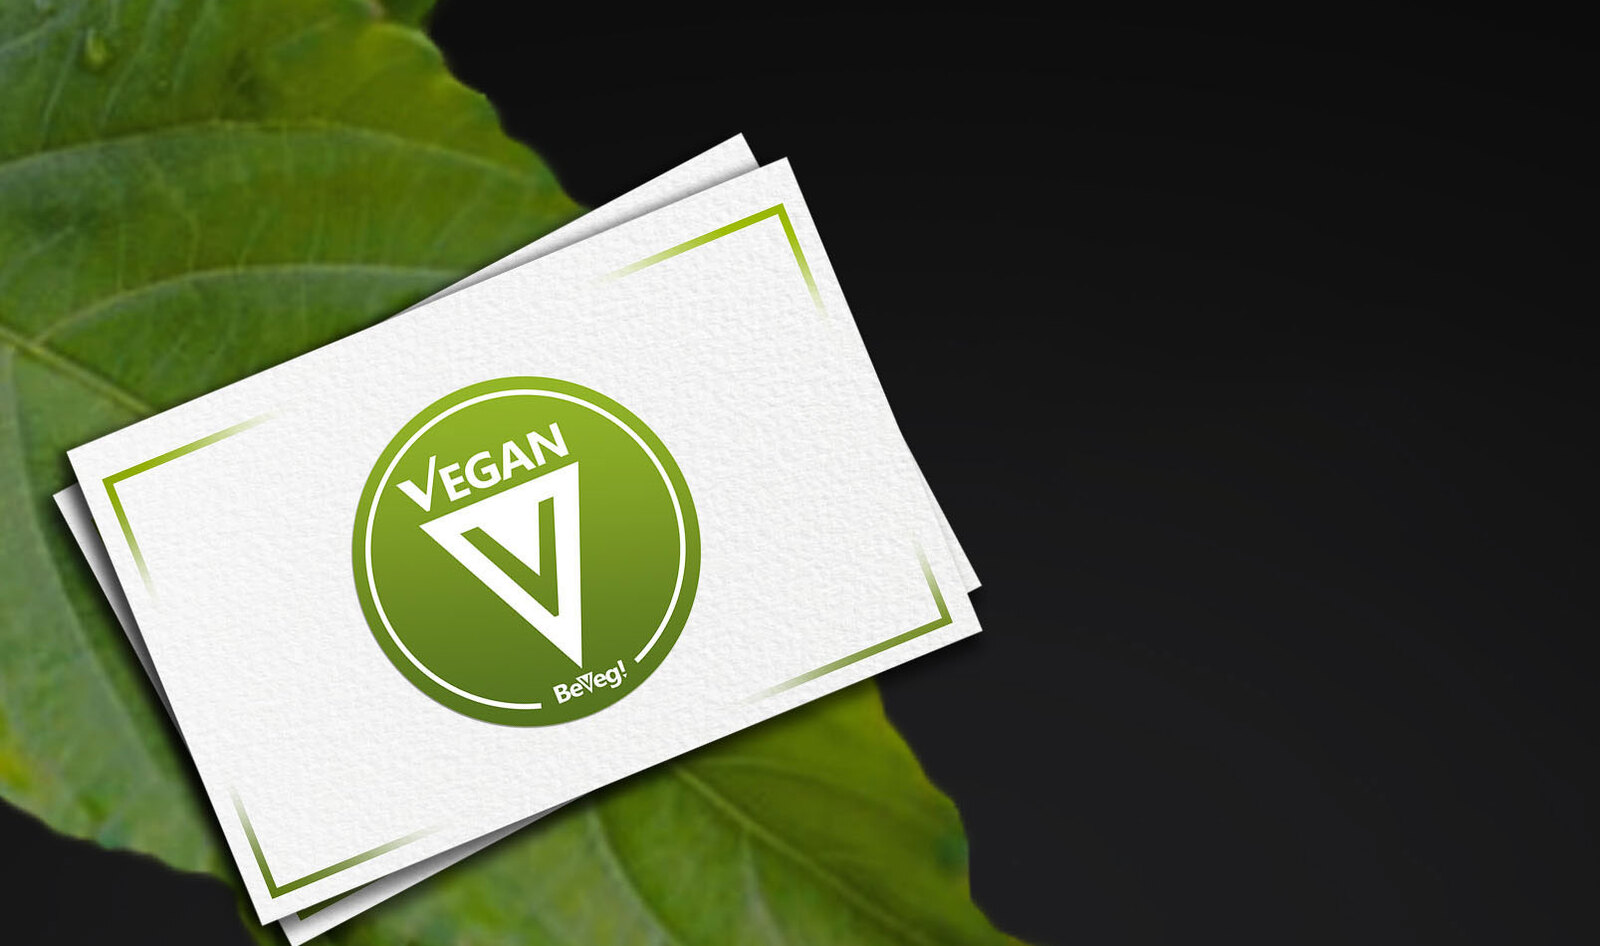 South Korea Is About to Label All of Its Vegan Products